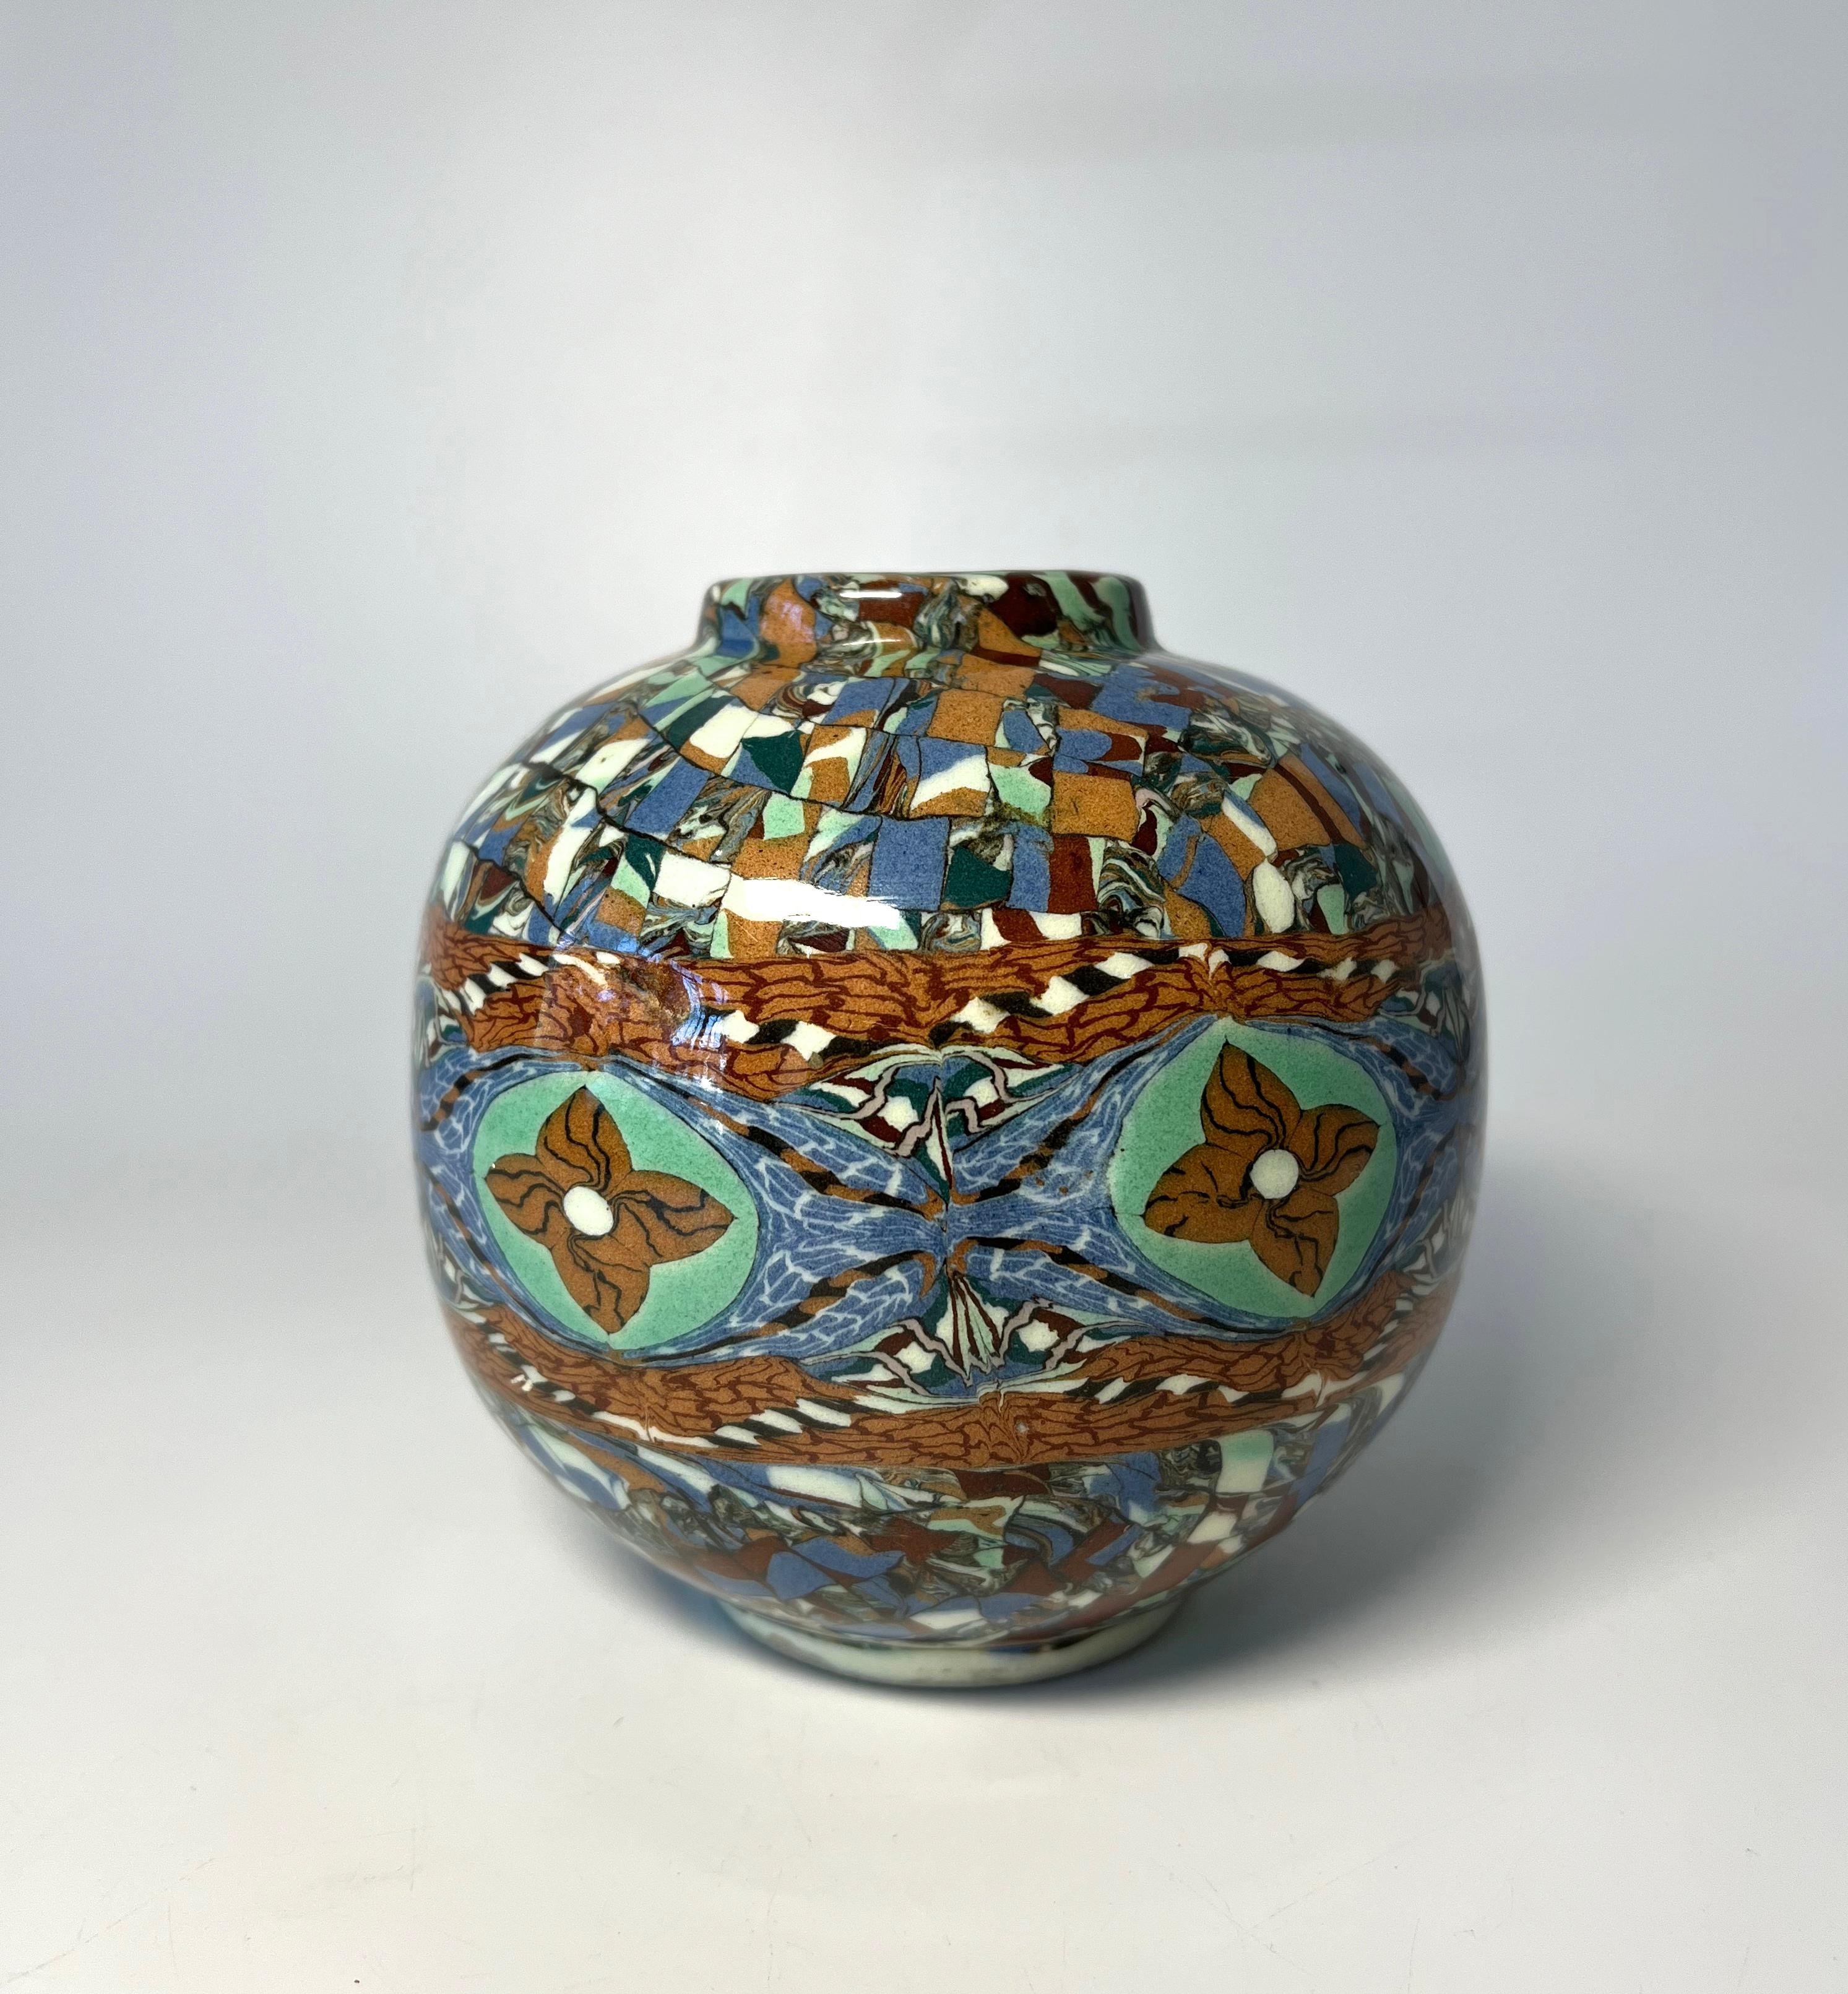 Generous Jean Gerbino For Vallauris, France, Ceramic Glazed Mosaic Ball Vase In Excellent Condition For Sale In Rothley, Leicestershire